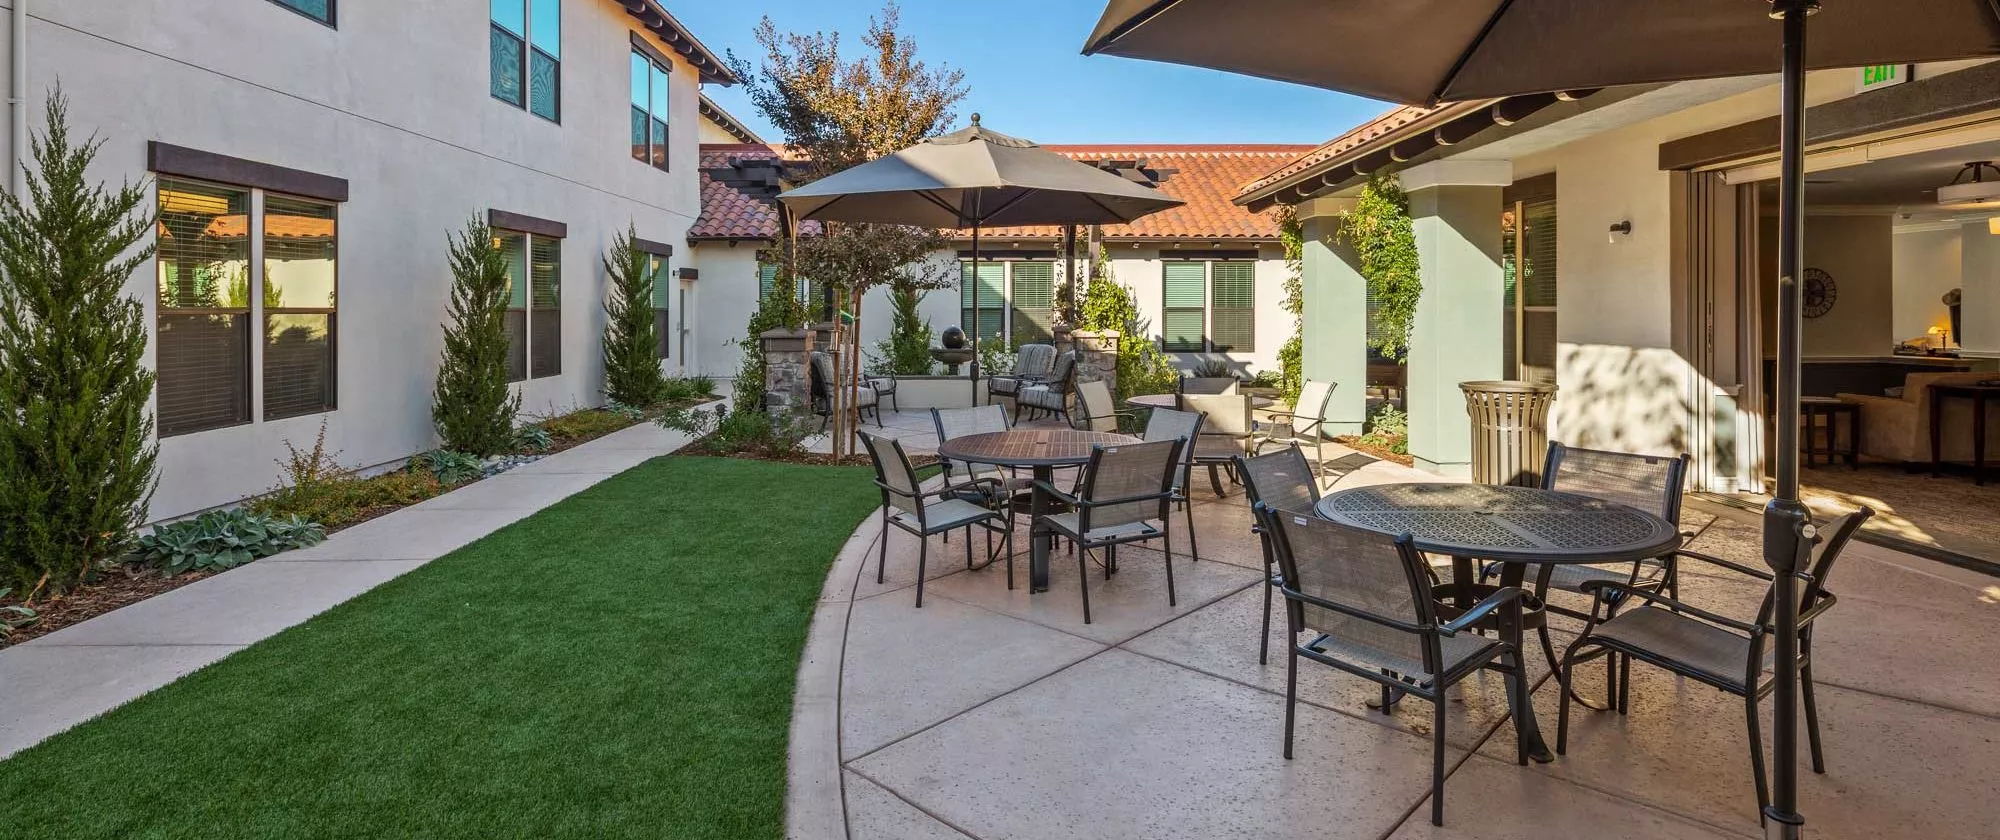 East Sacramento garden with patio and dining tables